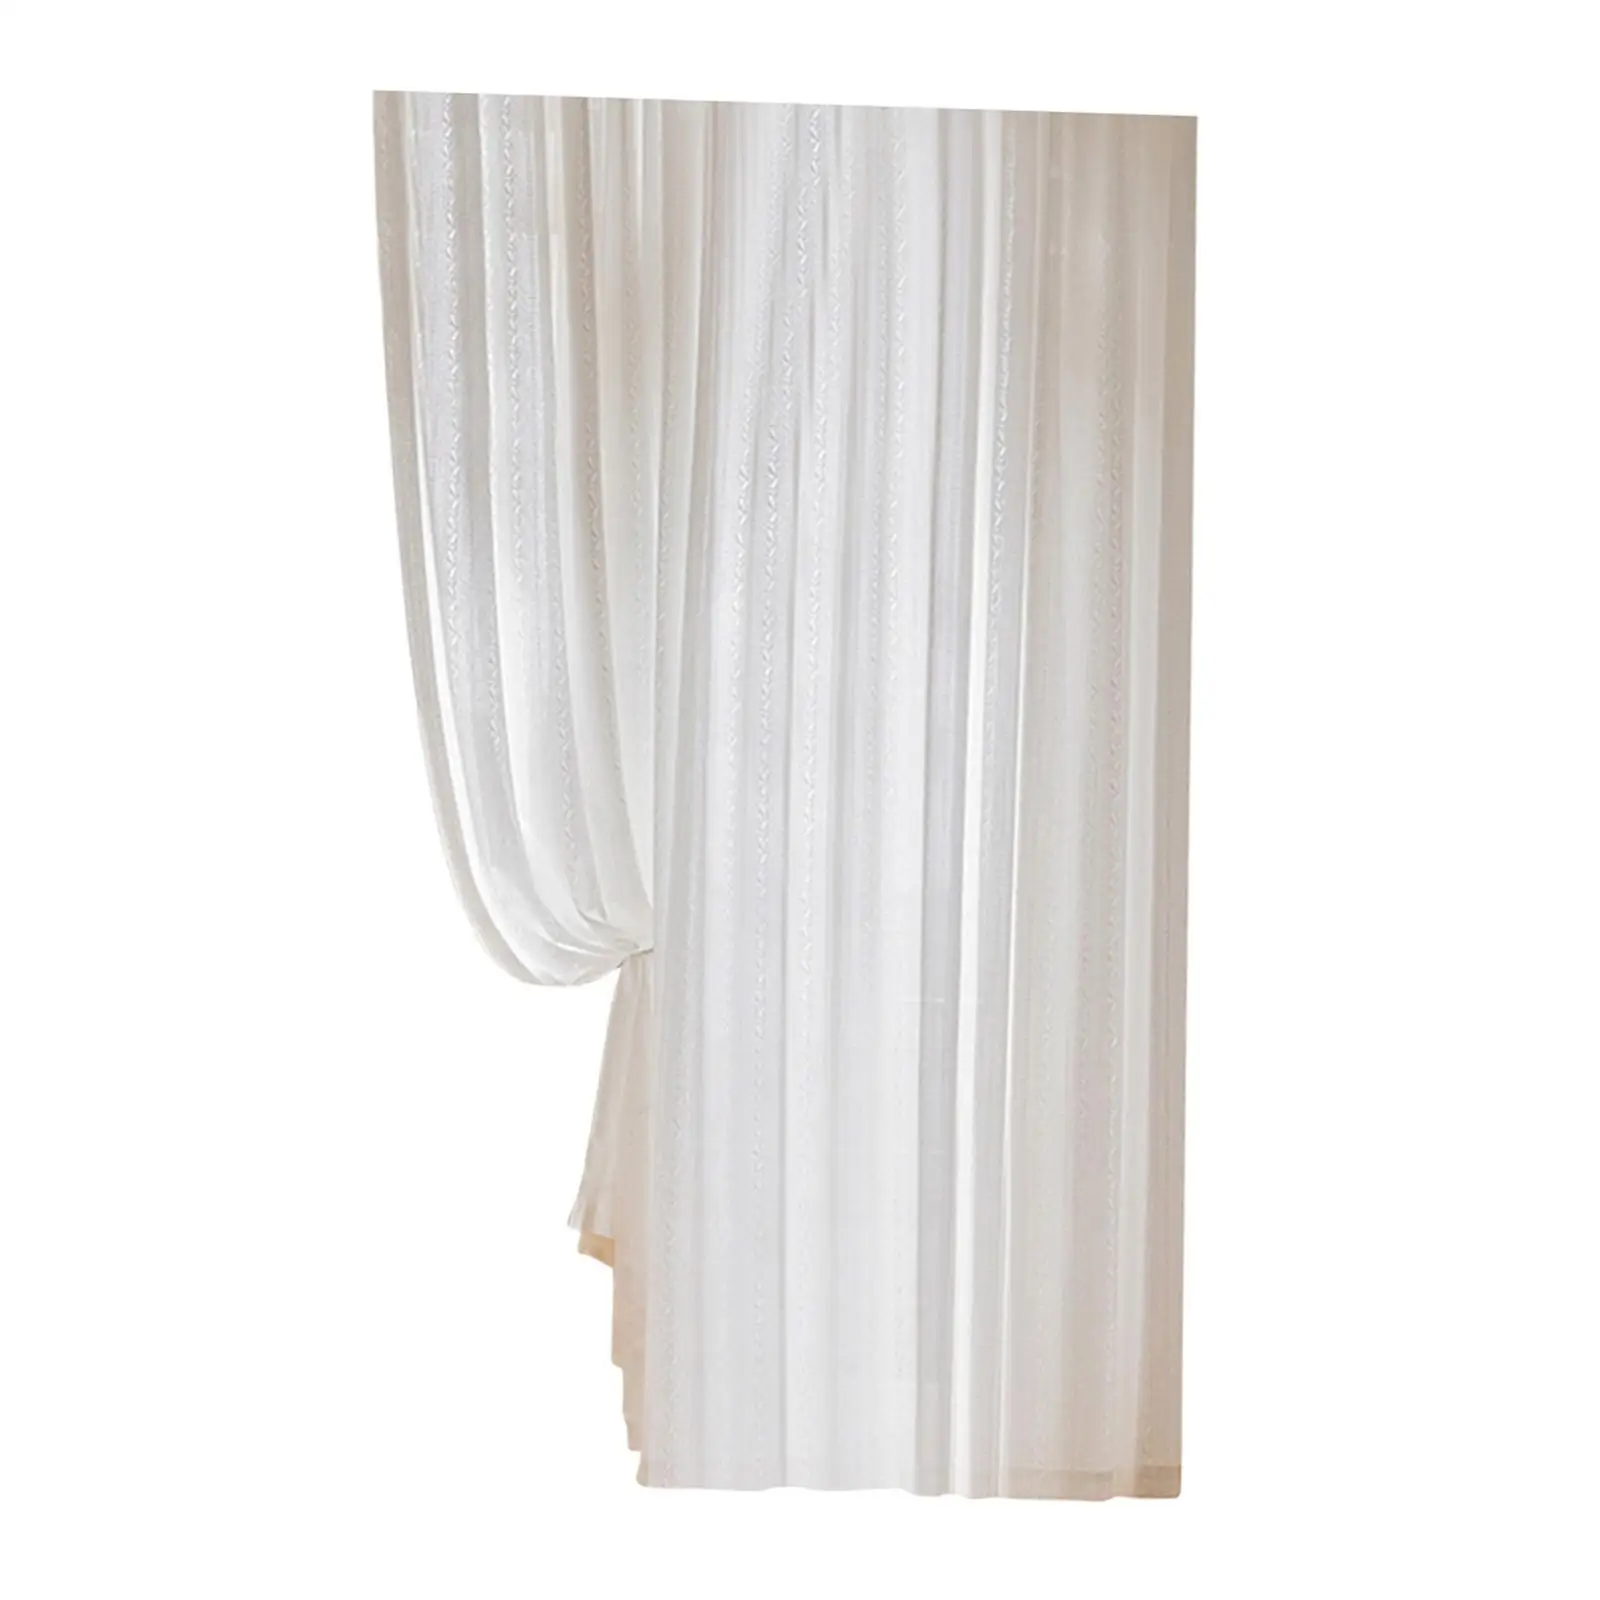 Curtains Door Curtain Rustic European Style Drapes Curtain Panels for Bedroom Study Restaurant Dining Room Decoration